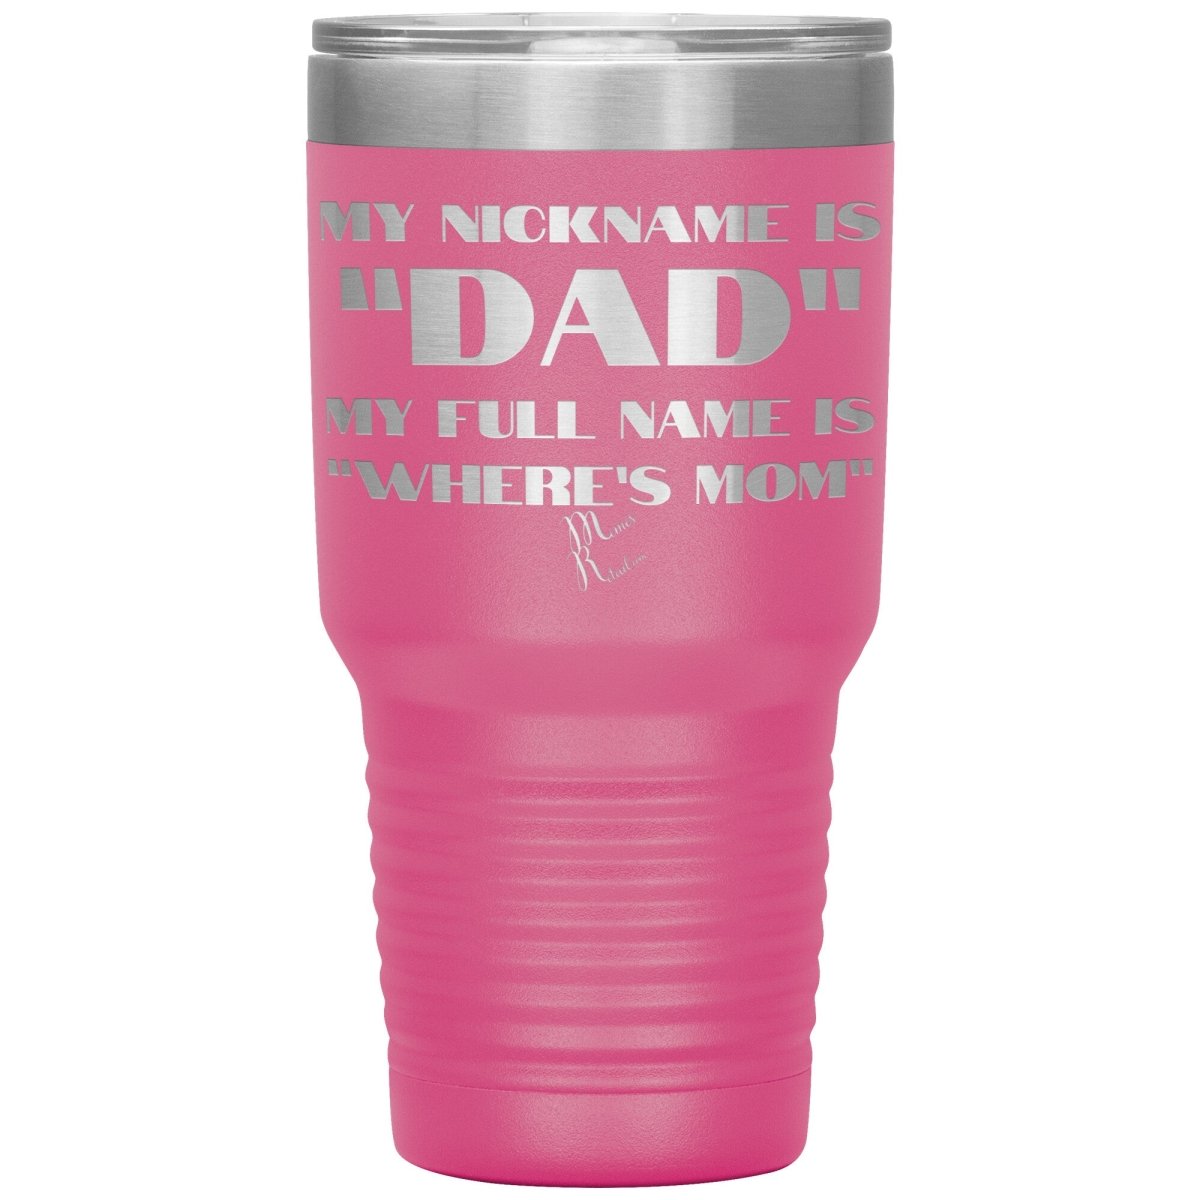 My Nickname is "Dad", My Full Name is "Where's Mom" Tumblers, 30oz Insulated Tumbler / Pink - MemesRetail.com